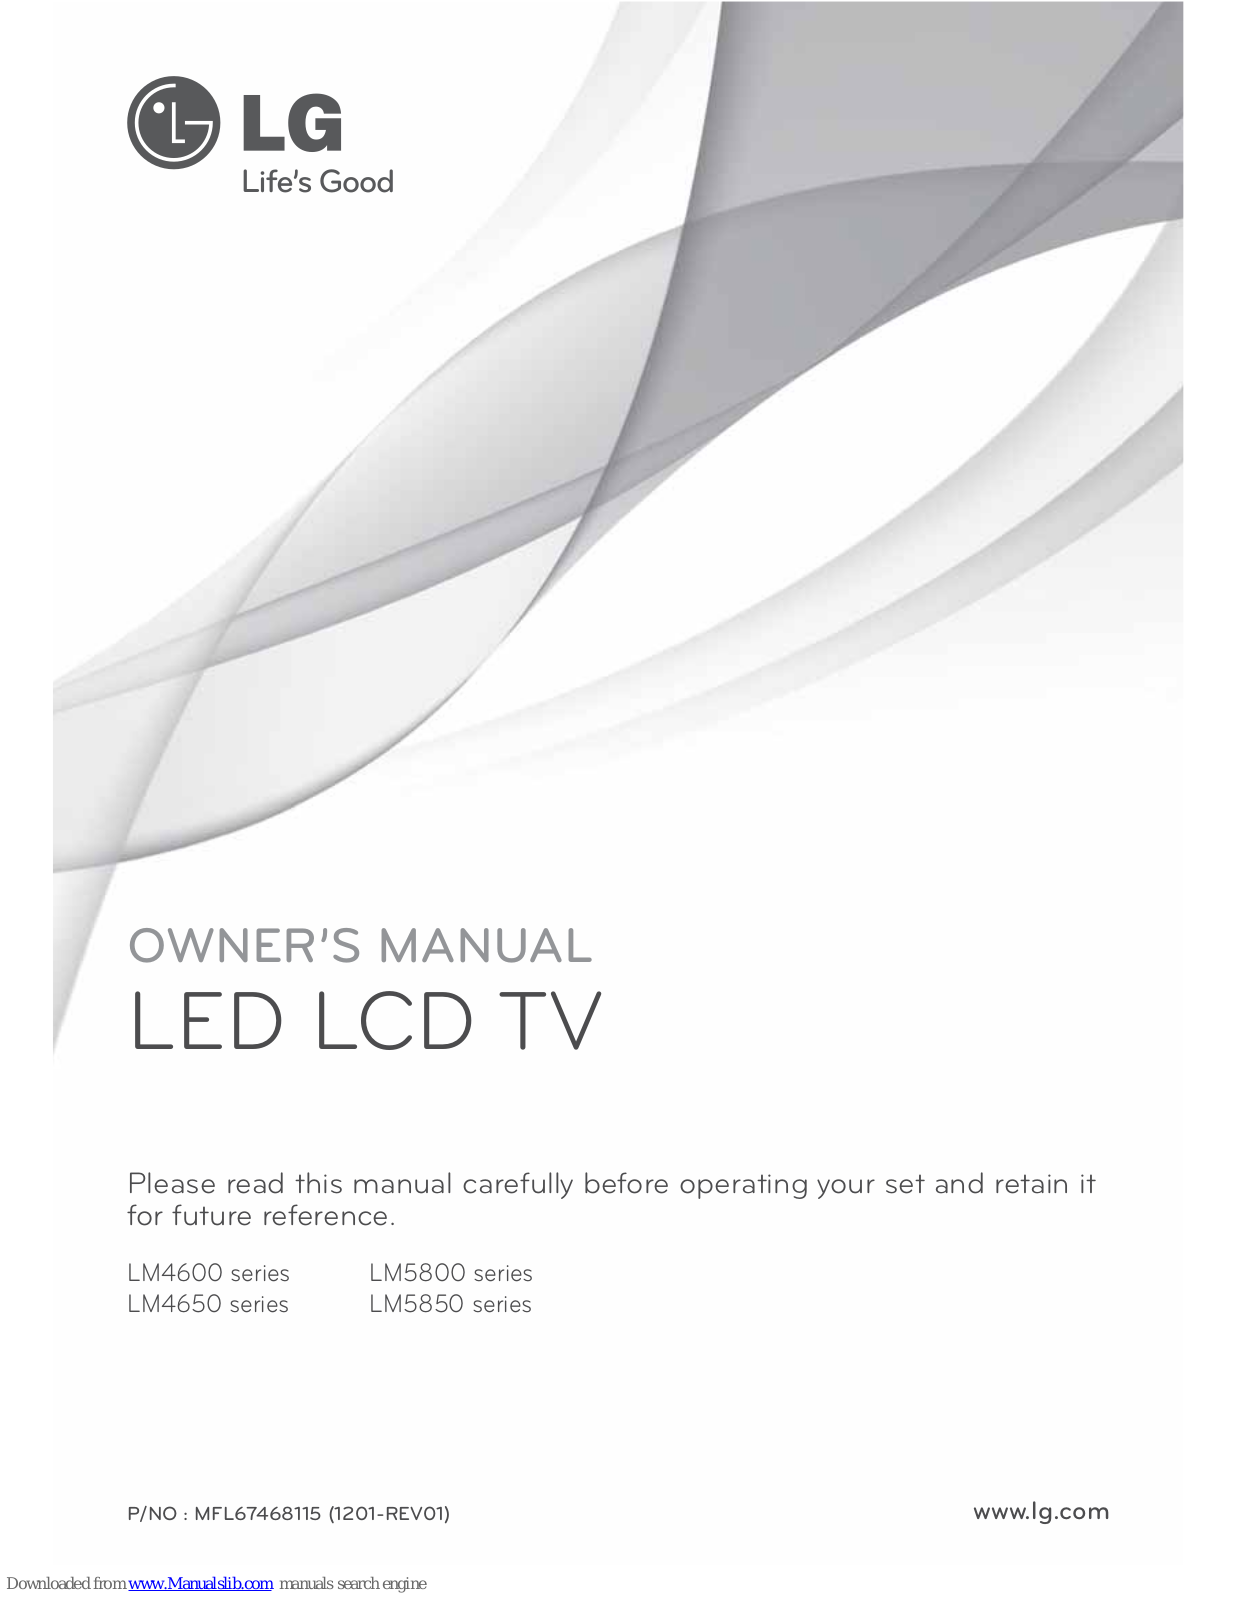 LG 42LM4600, LM4600 series, 47LM4600, 42LM4650, 47LM4650 Owner's Manual